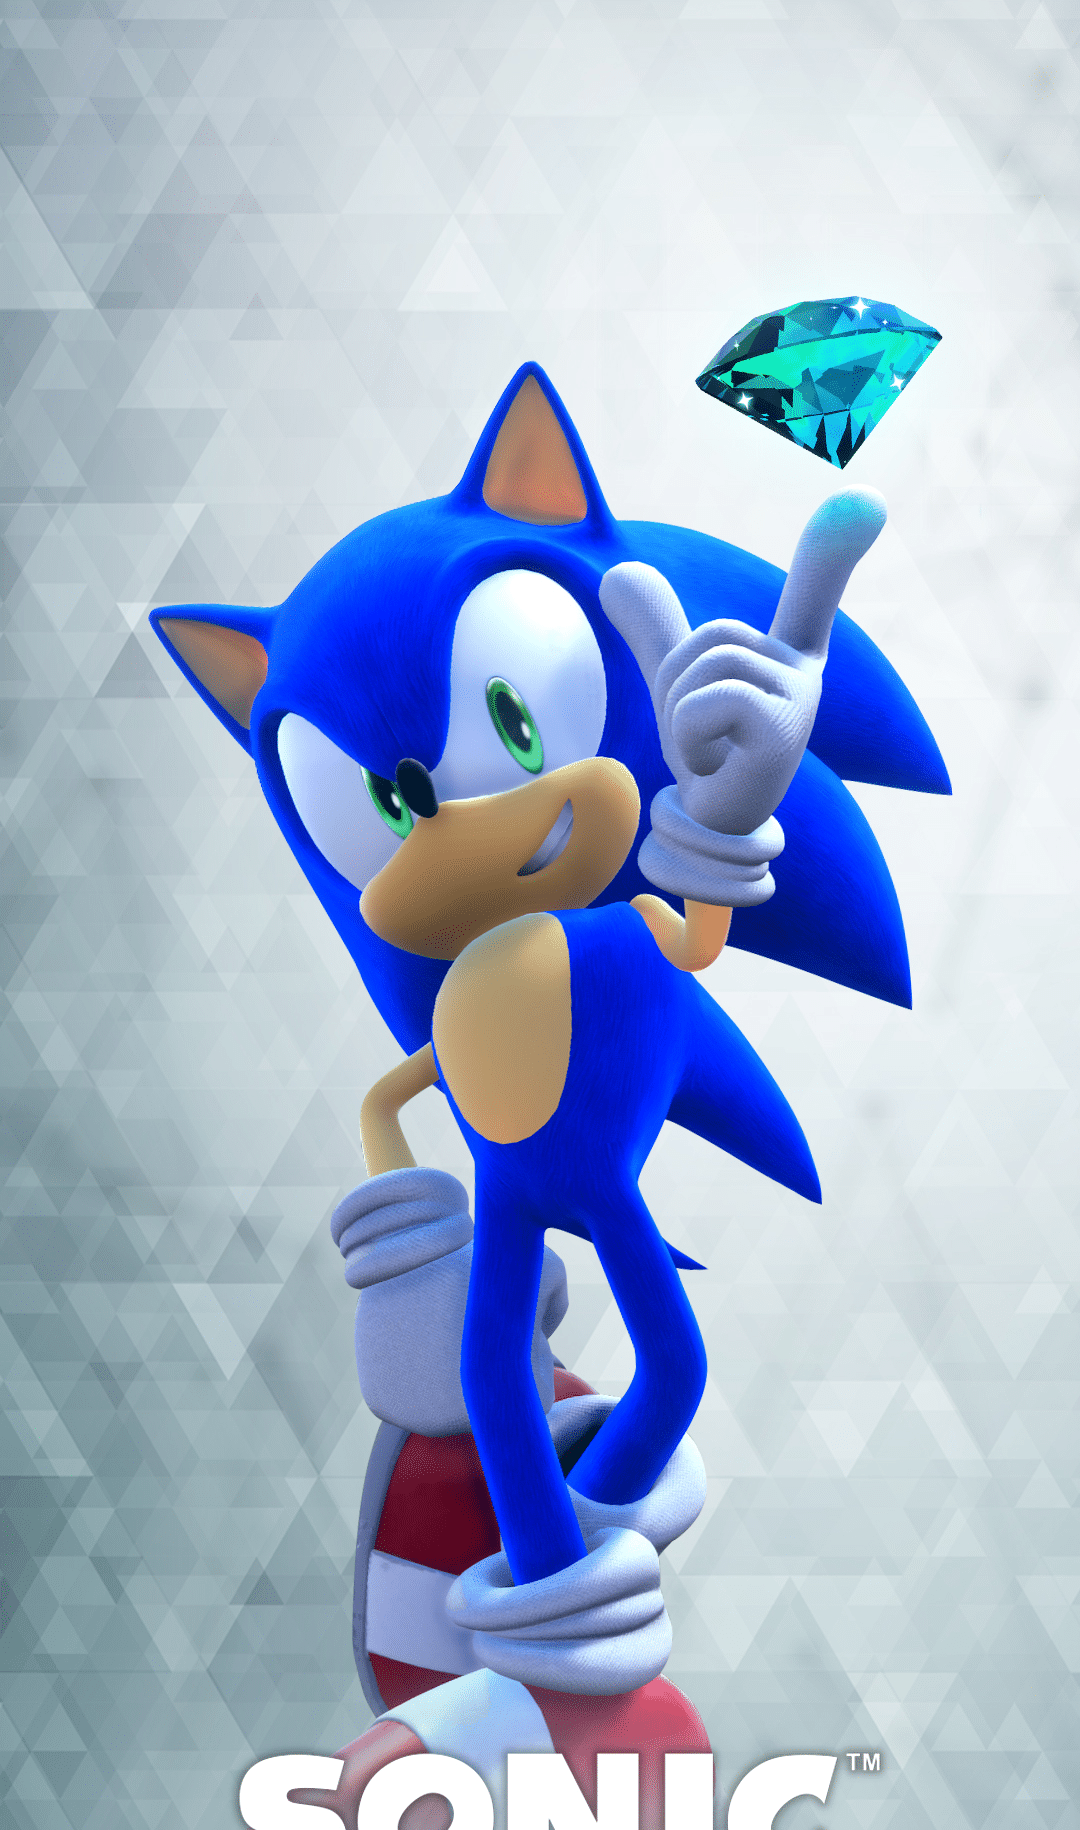 Sonic Frontiers Shares 3 New Mobile Wallpapers - Noisy Pixel